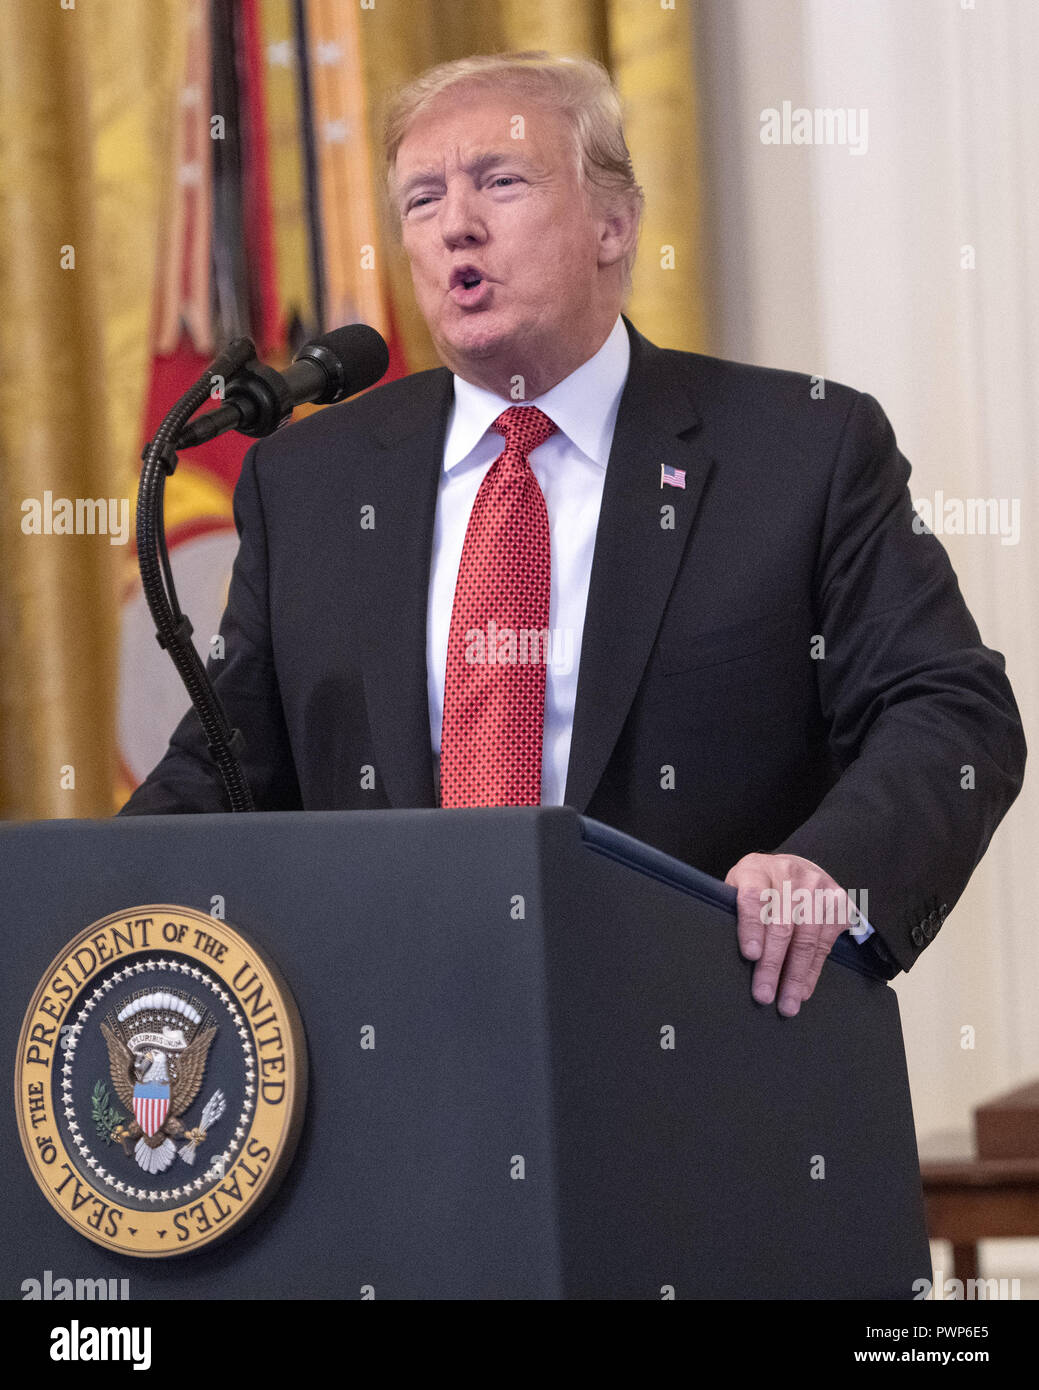 Washington, District of Columbia, USA. 17th Oct, 2018. United States President Donald J. Trump makes remarks as he awards the Medal of Honor to Sergeant Major John L. Canley, United States Marine Corps (Retired), for conspicuous gallantry during the Vietnam War in a ceremony in the East Room of the the White House in Washington, DC on Wednesday, October 17, 2018 Credit: Ron Sachs/CNP/ZUMA Wire/Alamy Live News Stock Photo